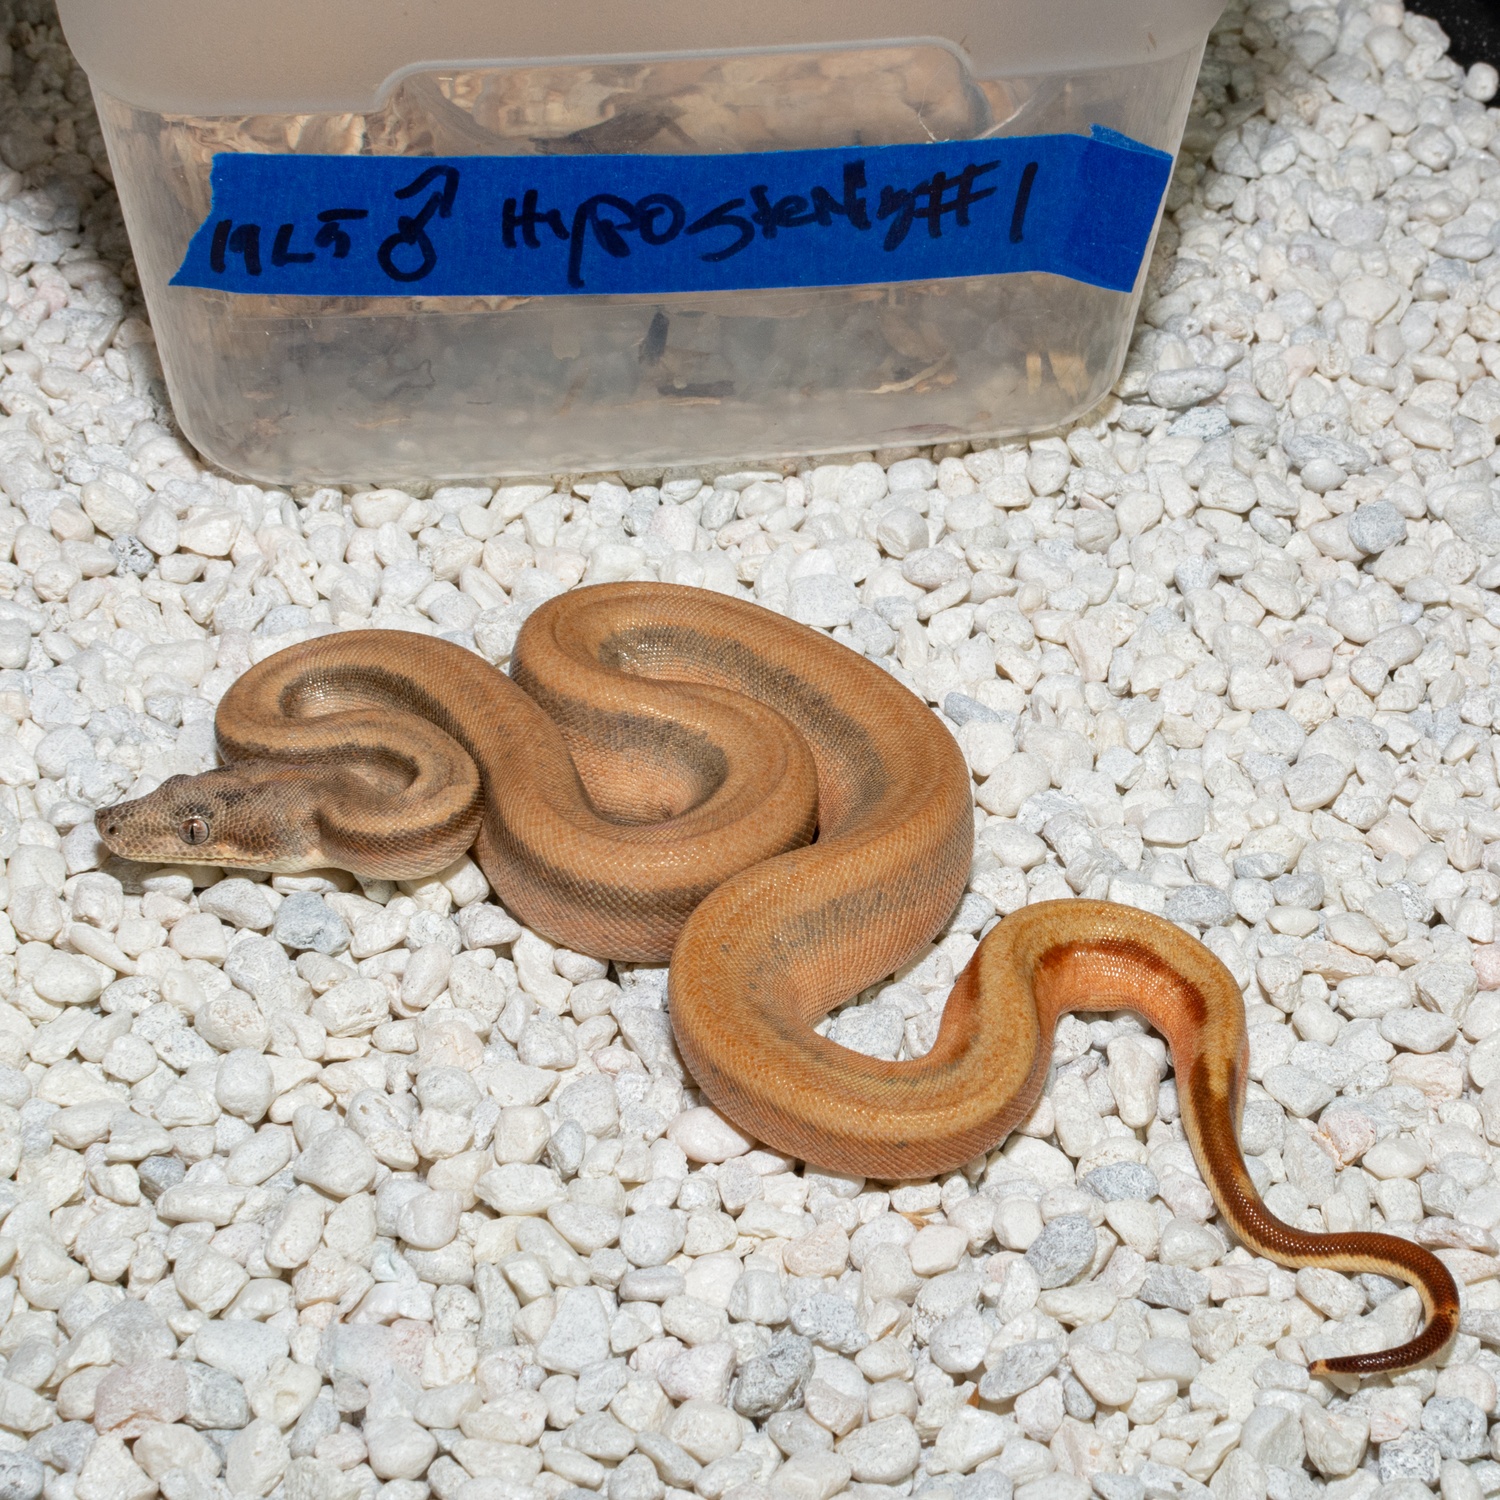 Hypo Sterling Boa Constrictor by Mainely Boas